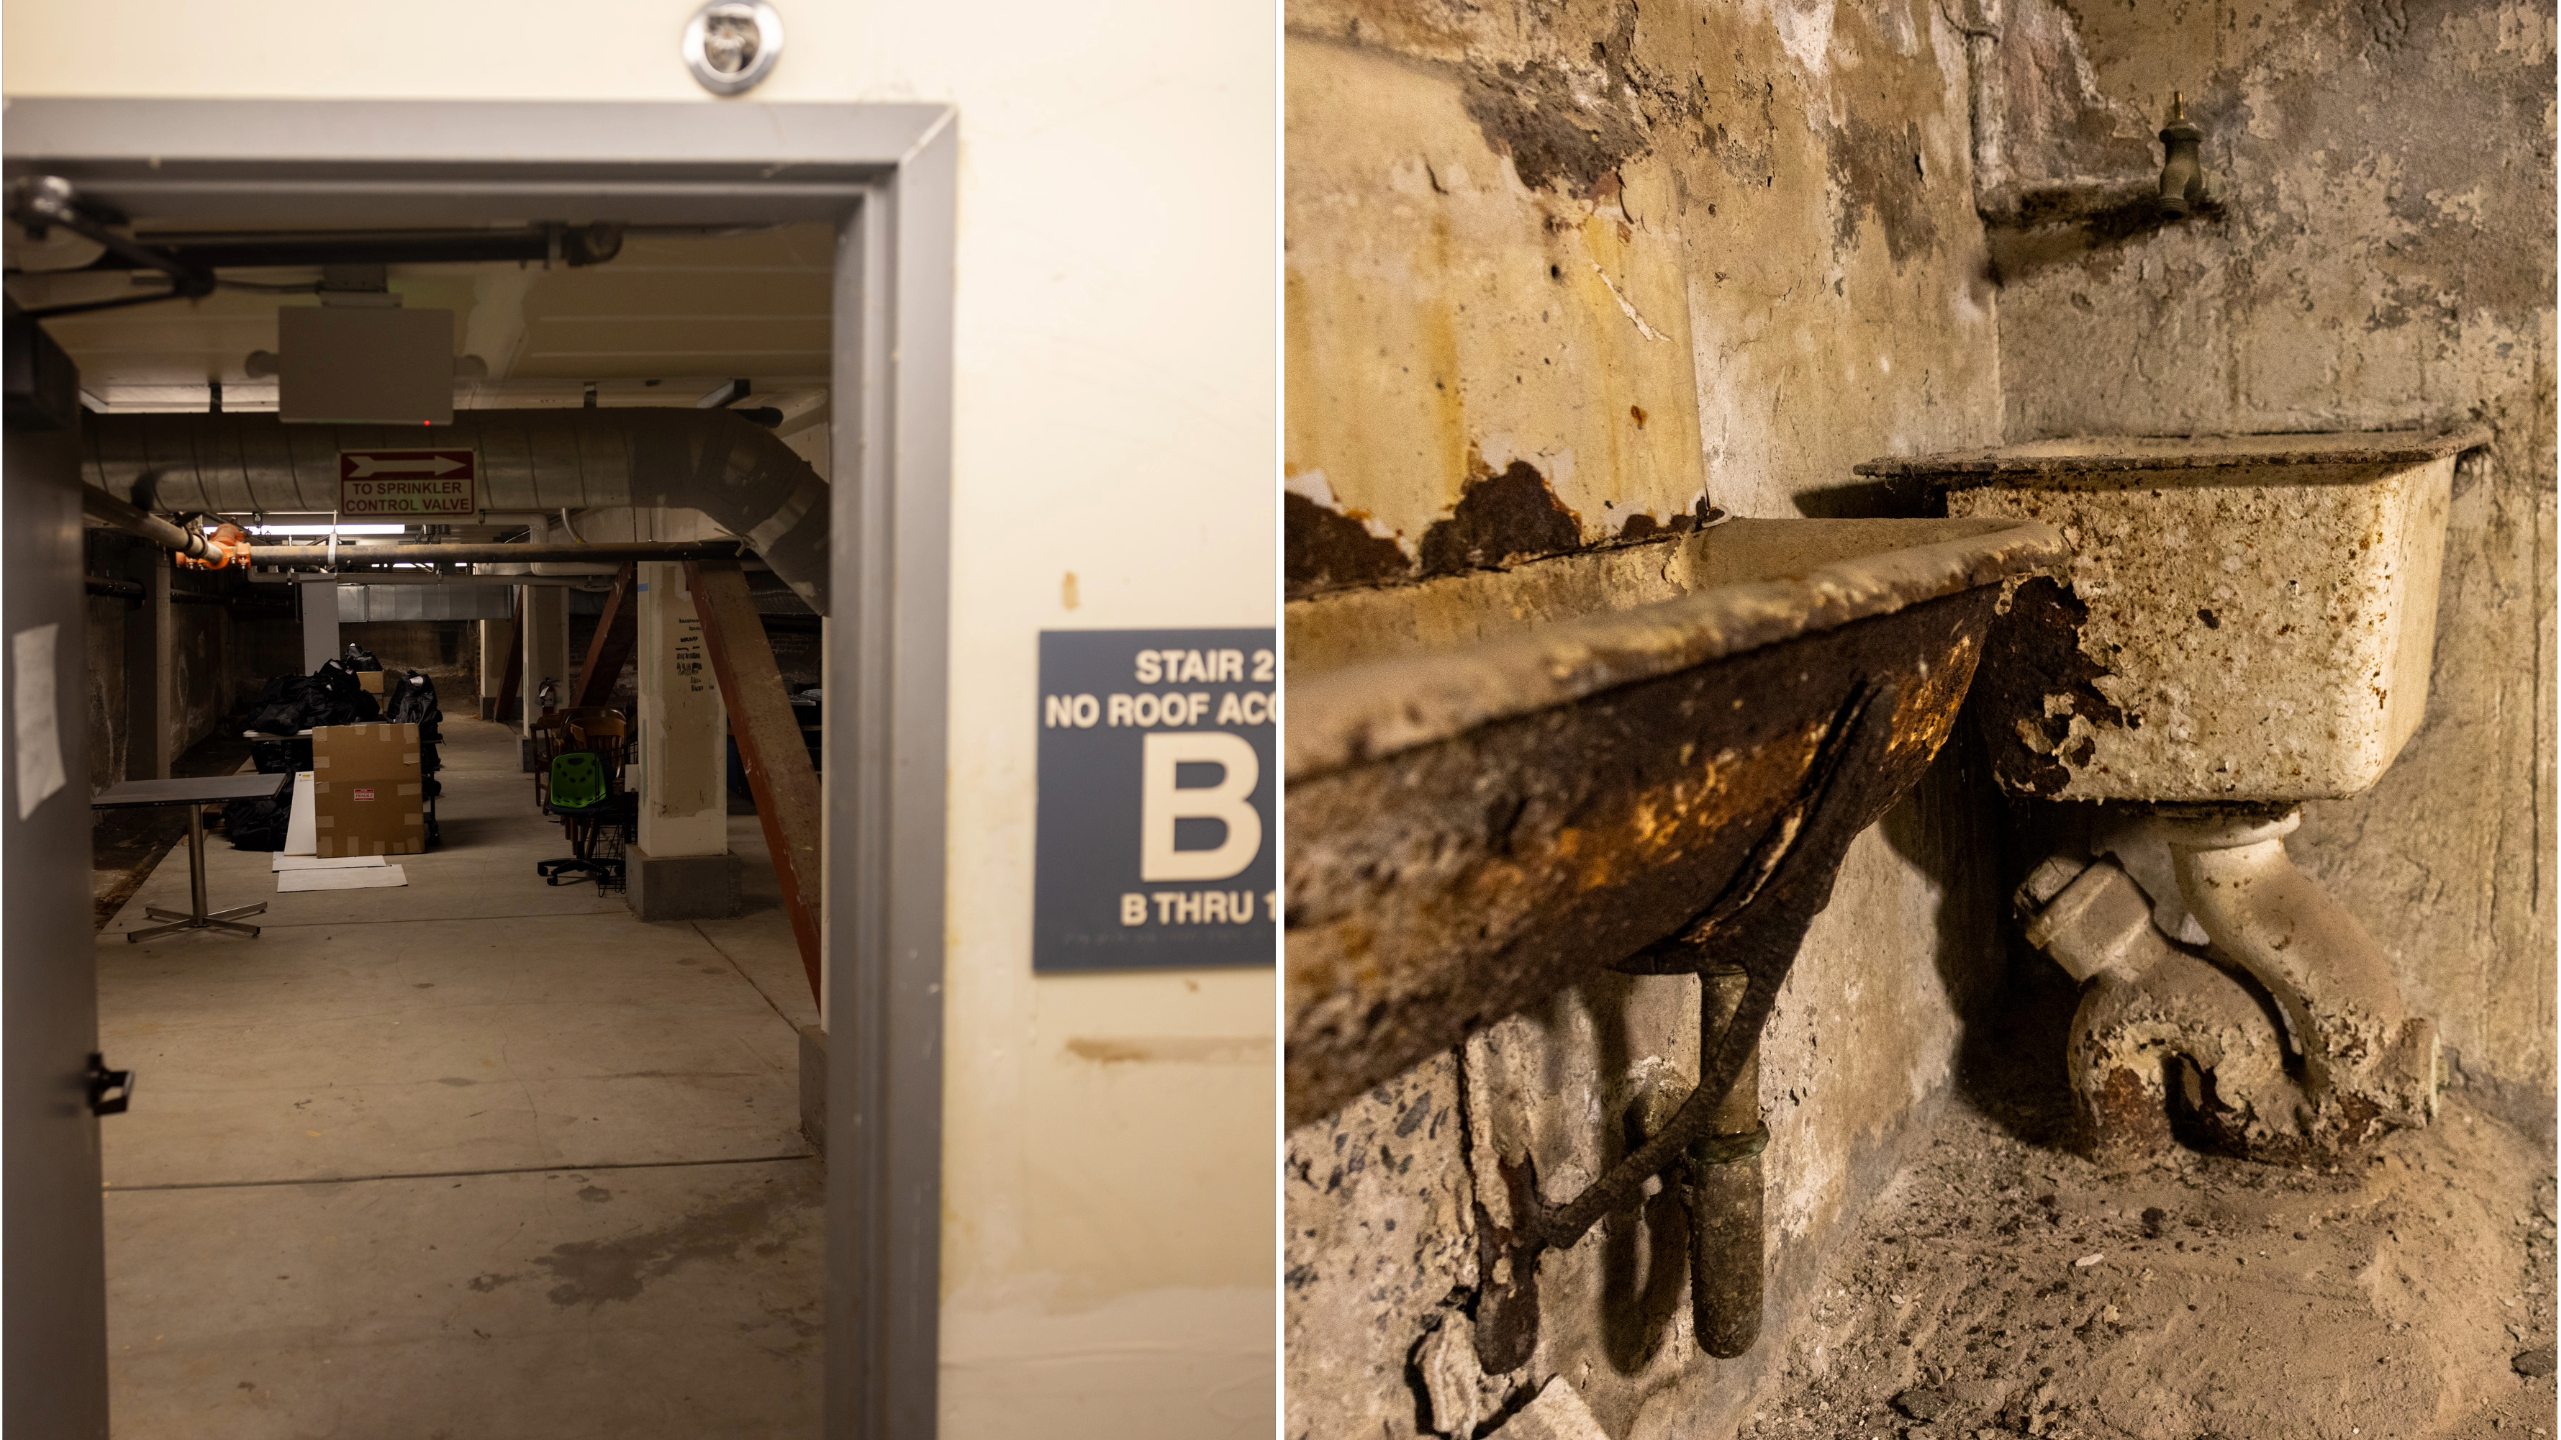 A dilapidated basement hallway on the left, and a corroded, dirty sink with exposed pipes on the right.